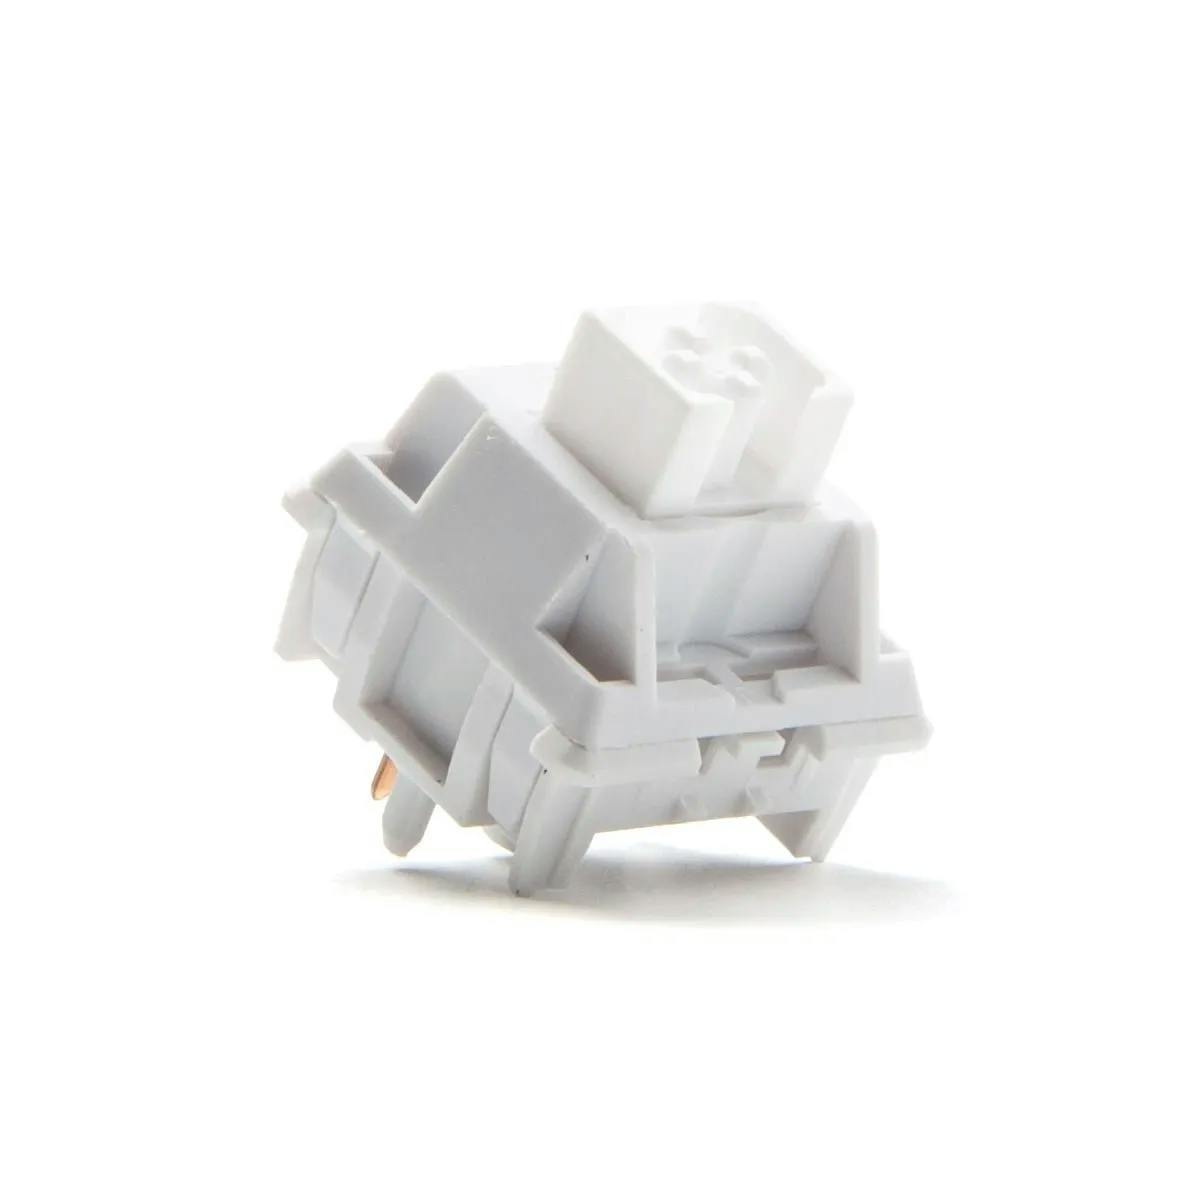 Image for Haimu x Geon HG White Tactile Switches